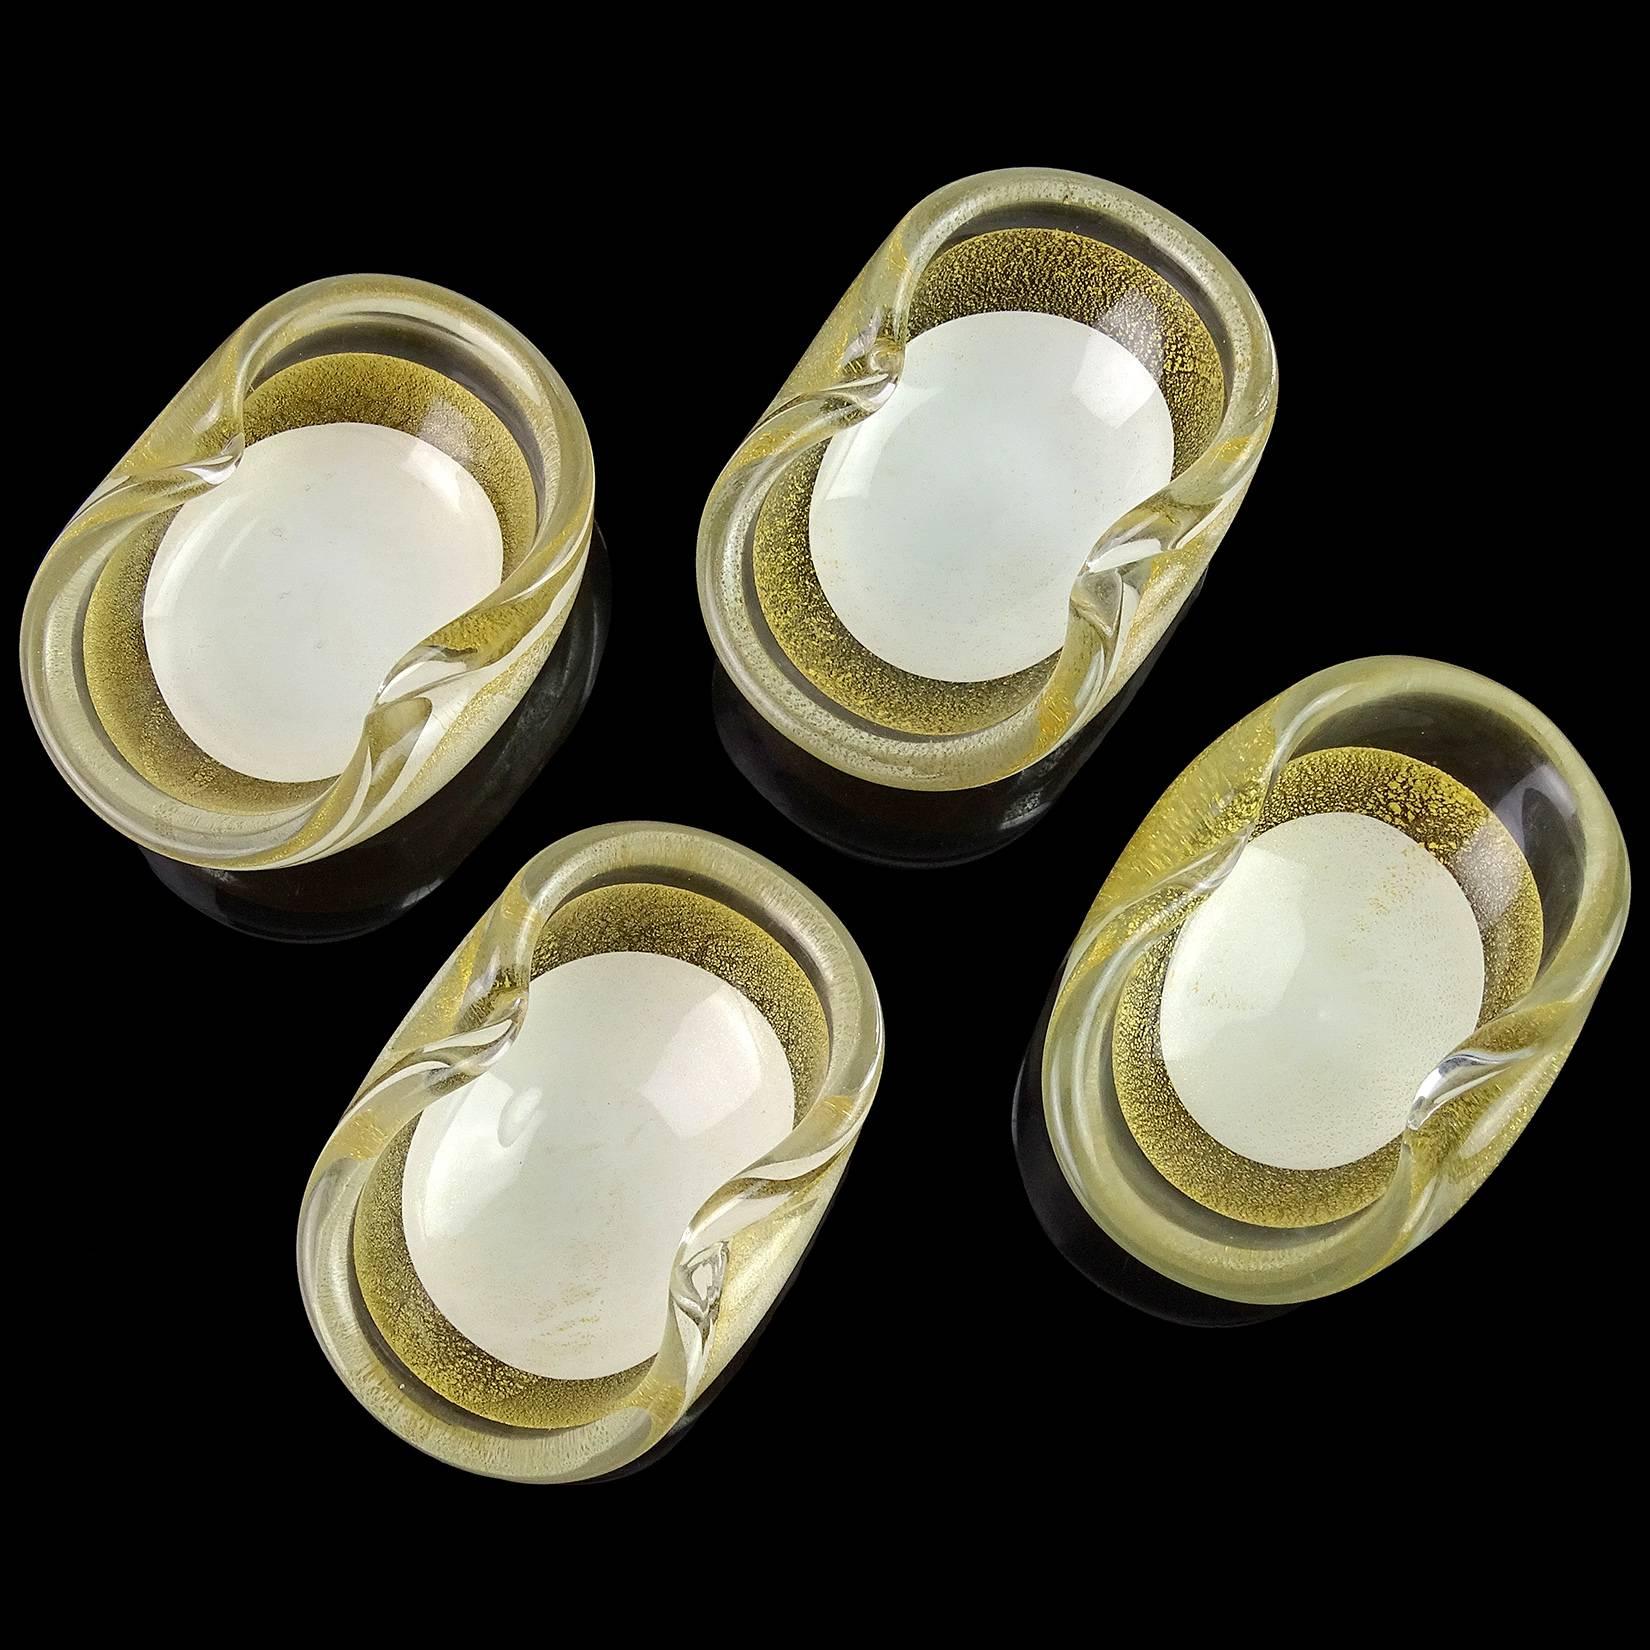 Beautiful set of Murano handblown gold flecks over white Italian art glass ring bowls or salt dishes. Documented to the Salviati Company, circa 1950s. Simple and elegant shapes. Covered throughout with gold leaf. They measure about 3 3/8” long x 2